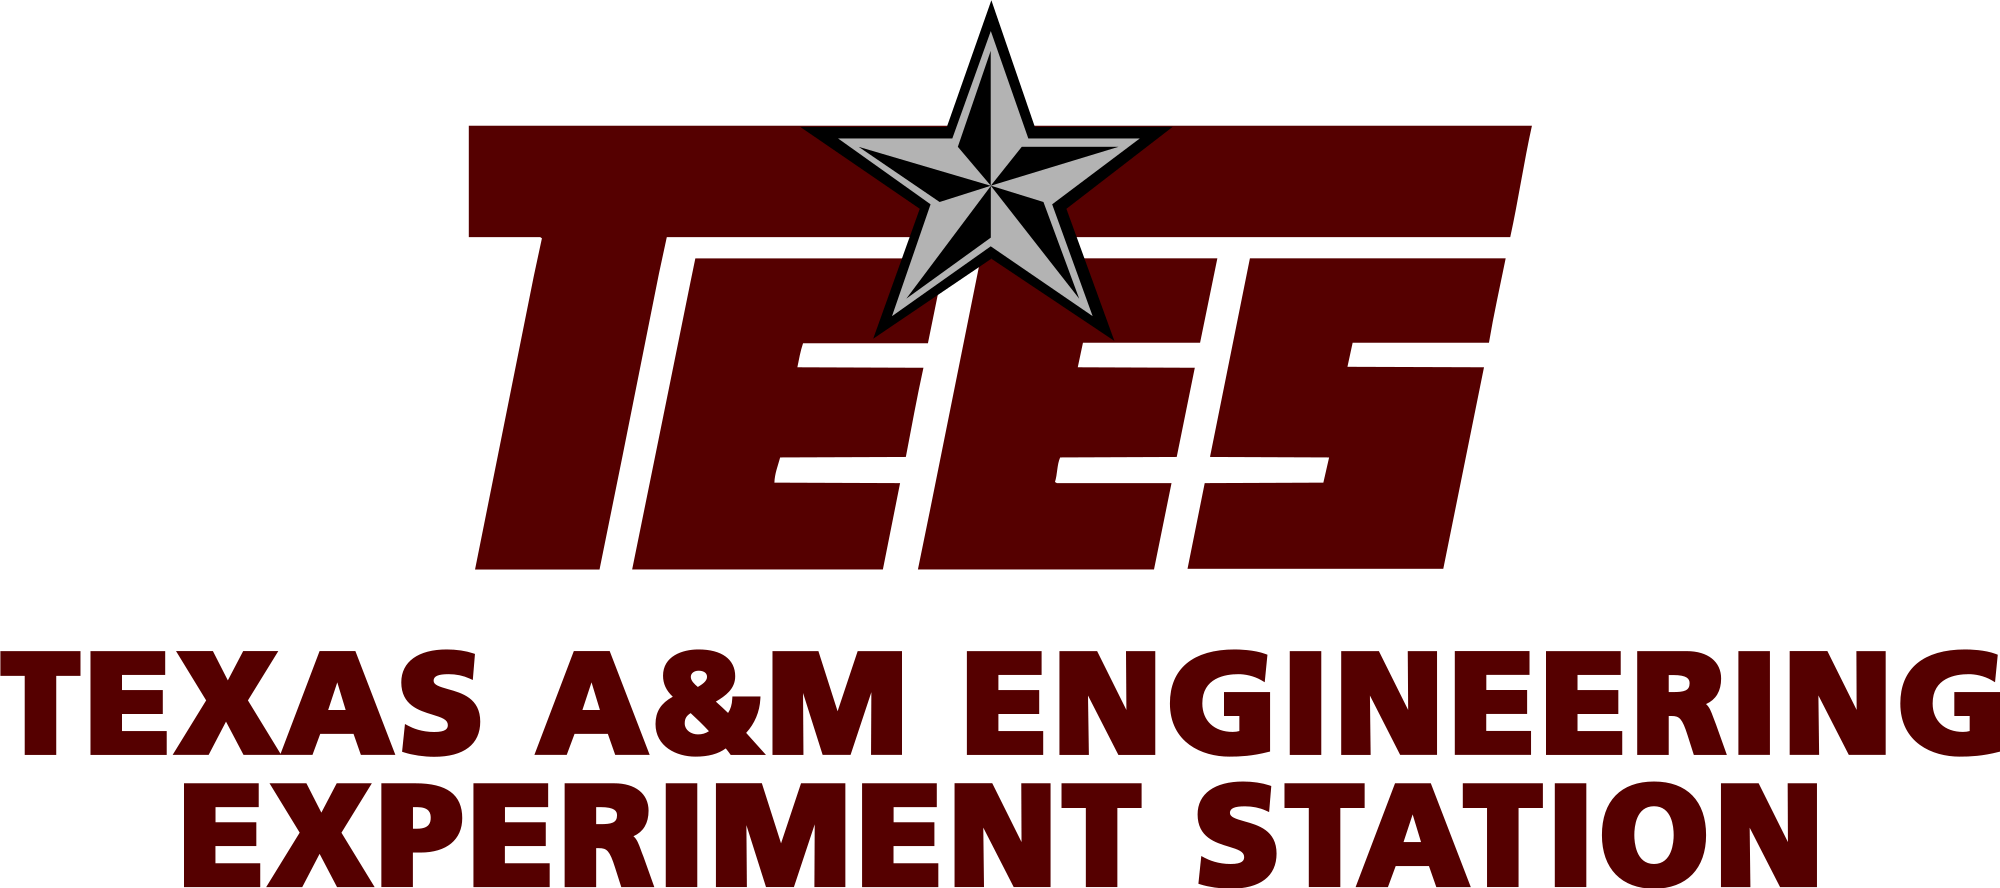 Texas Station Logo - File:Texas A&M Engineering Experiment Station logo.svg - Wikimedia ...